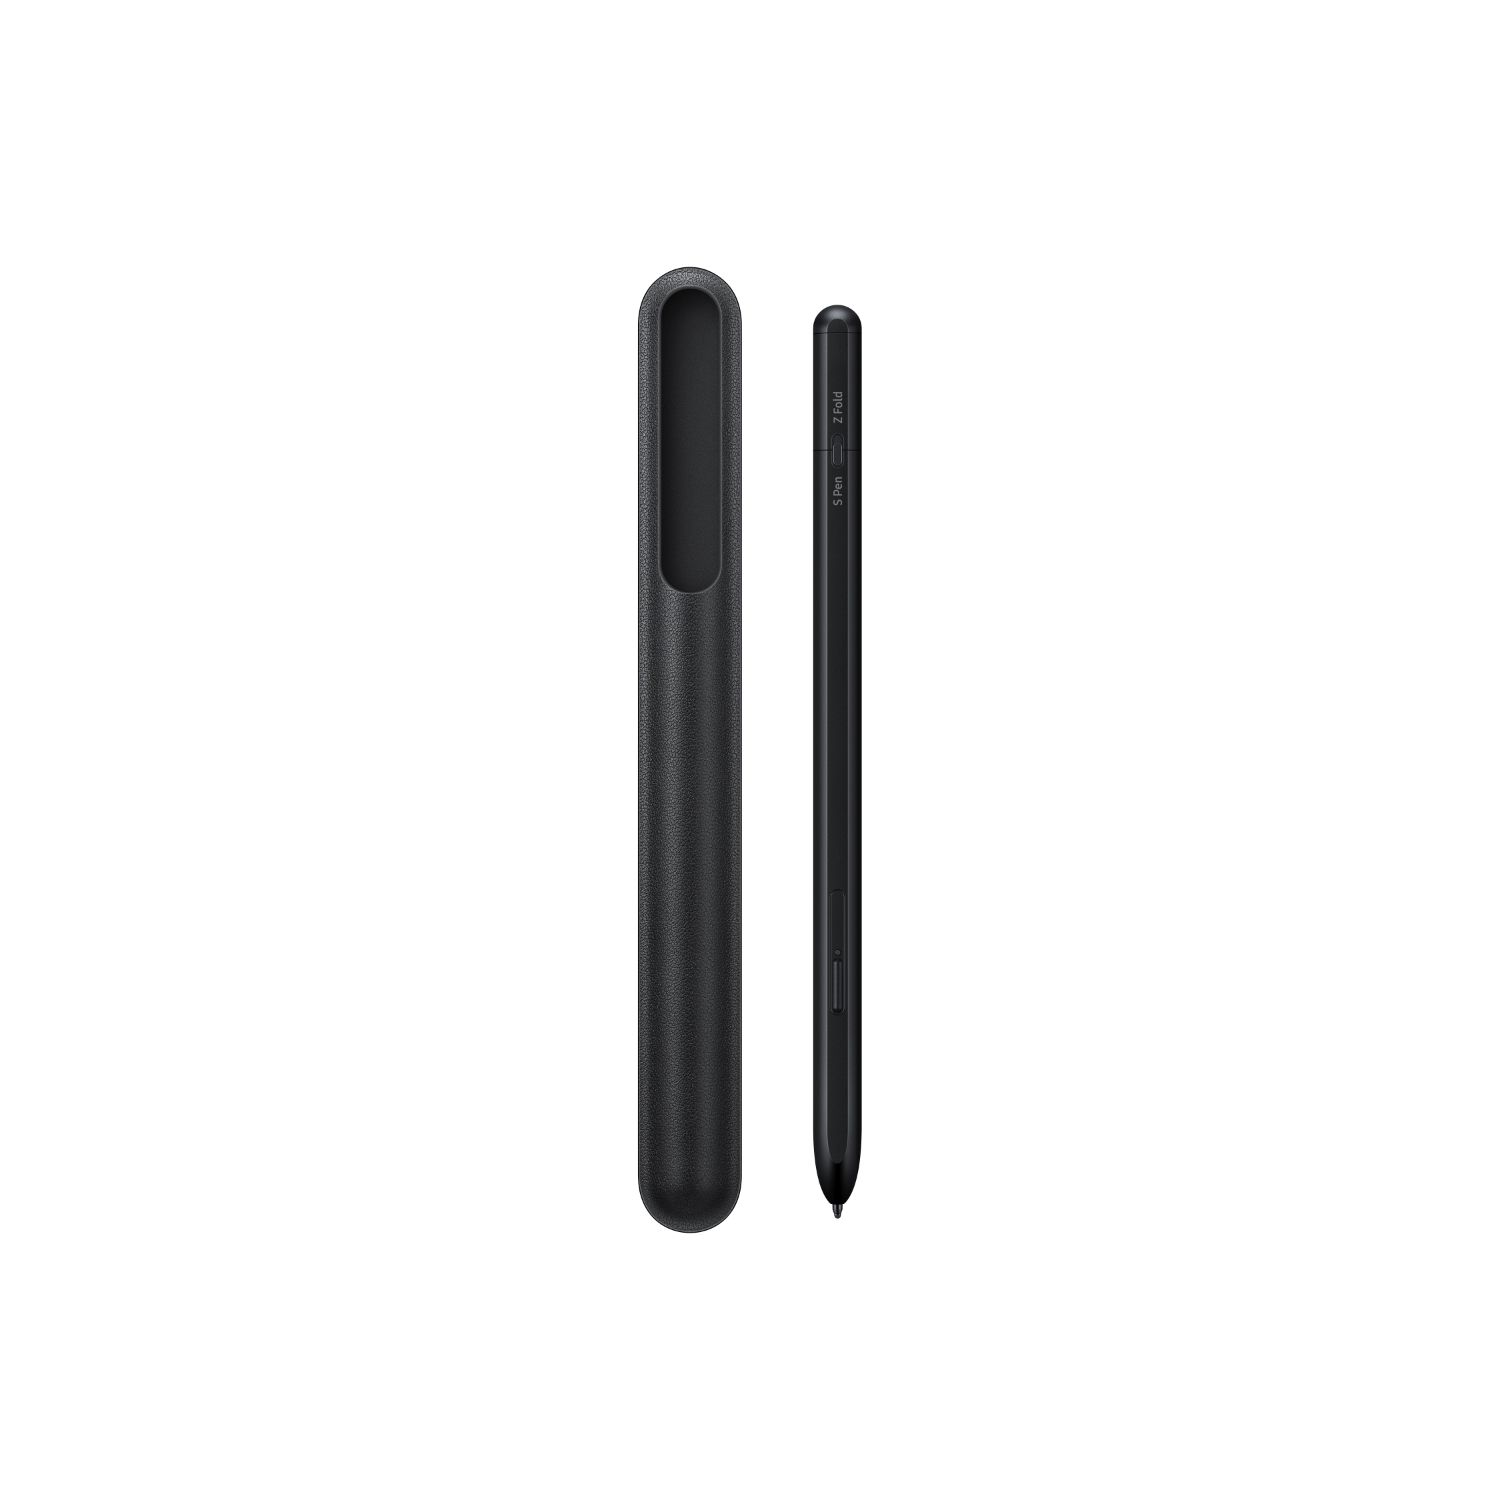 Stylus Pens for the Samsung compatible devices